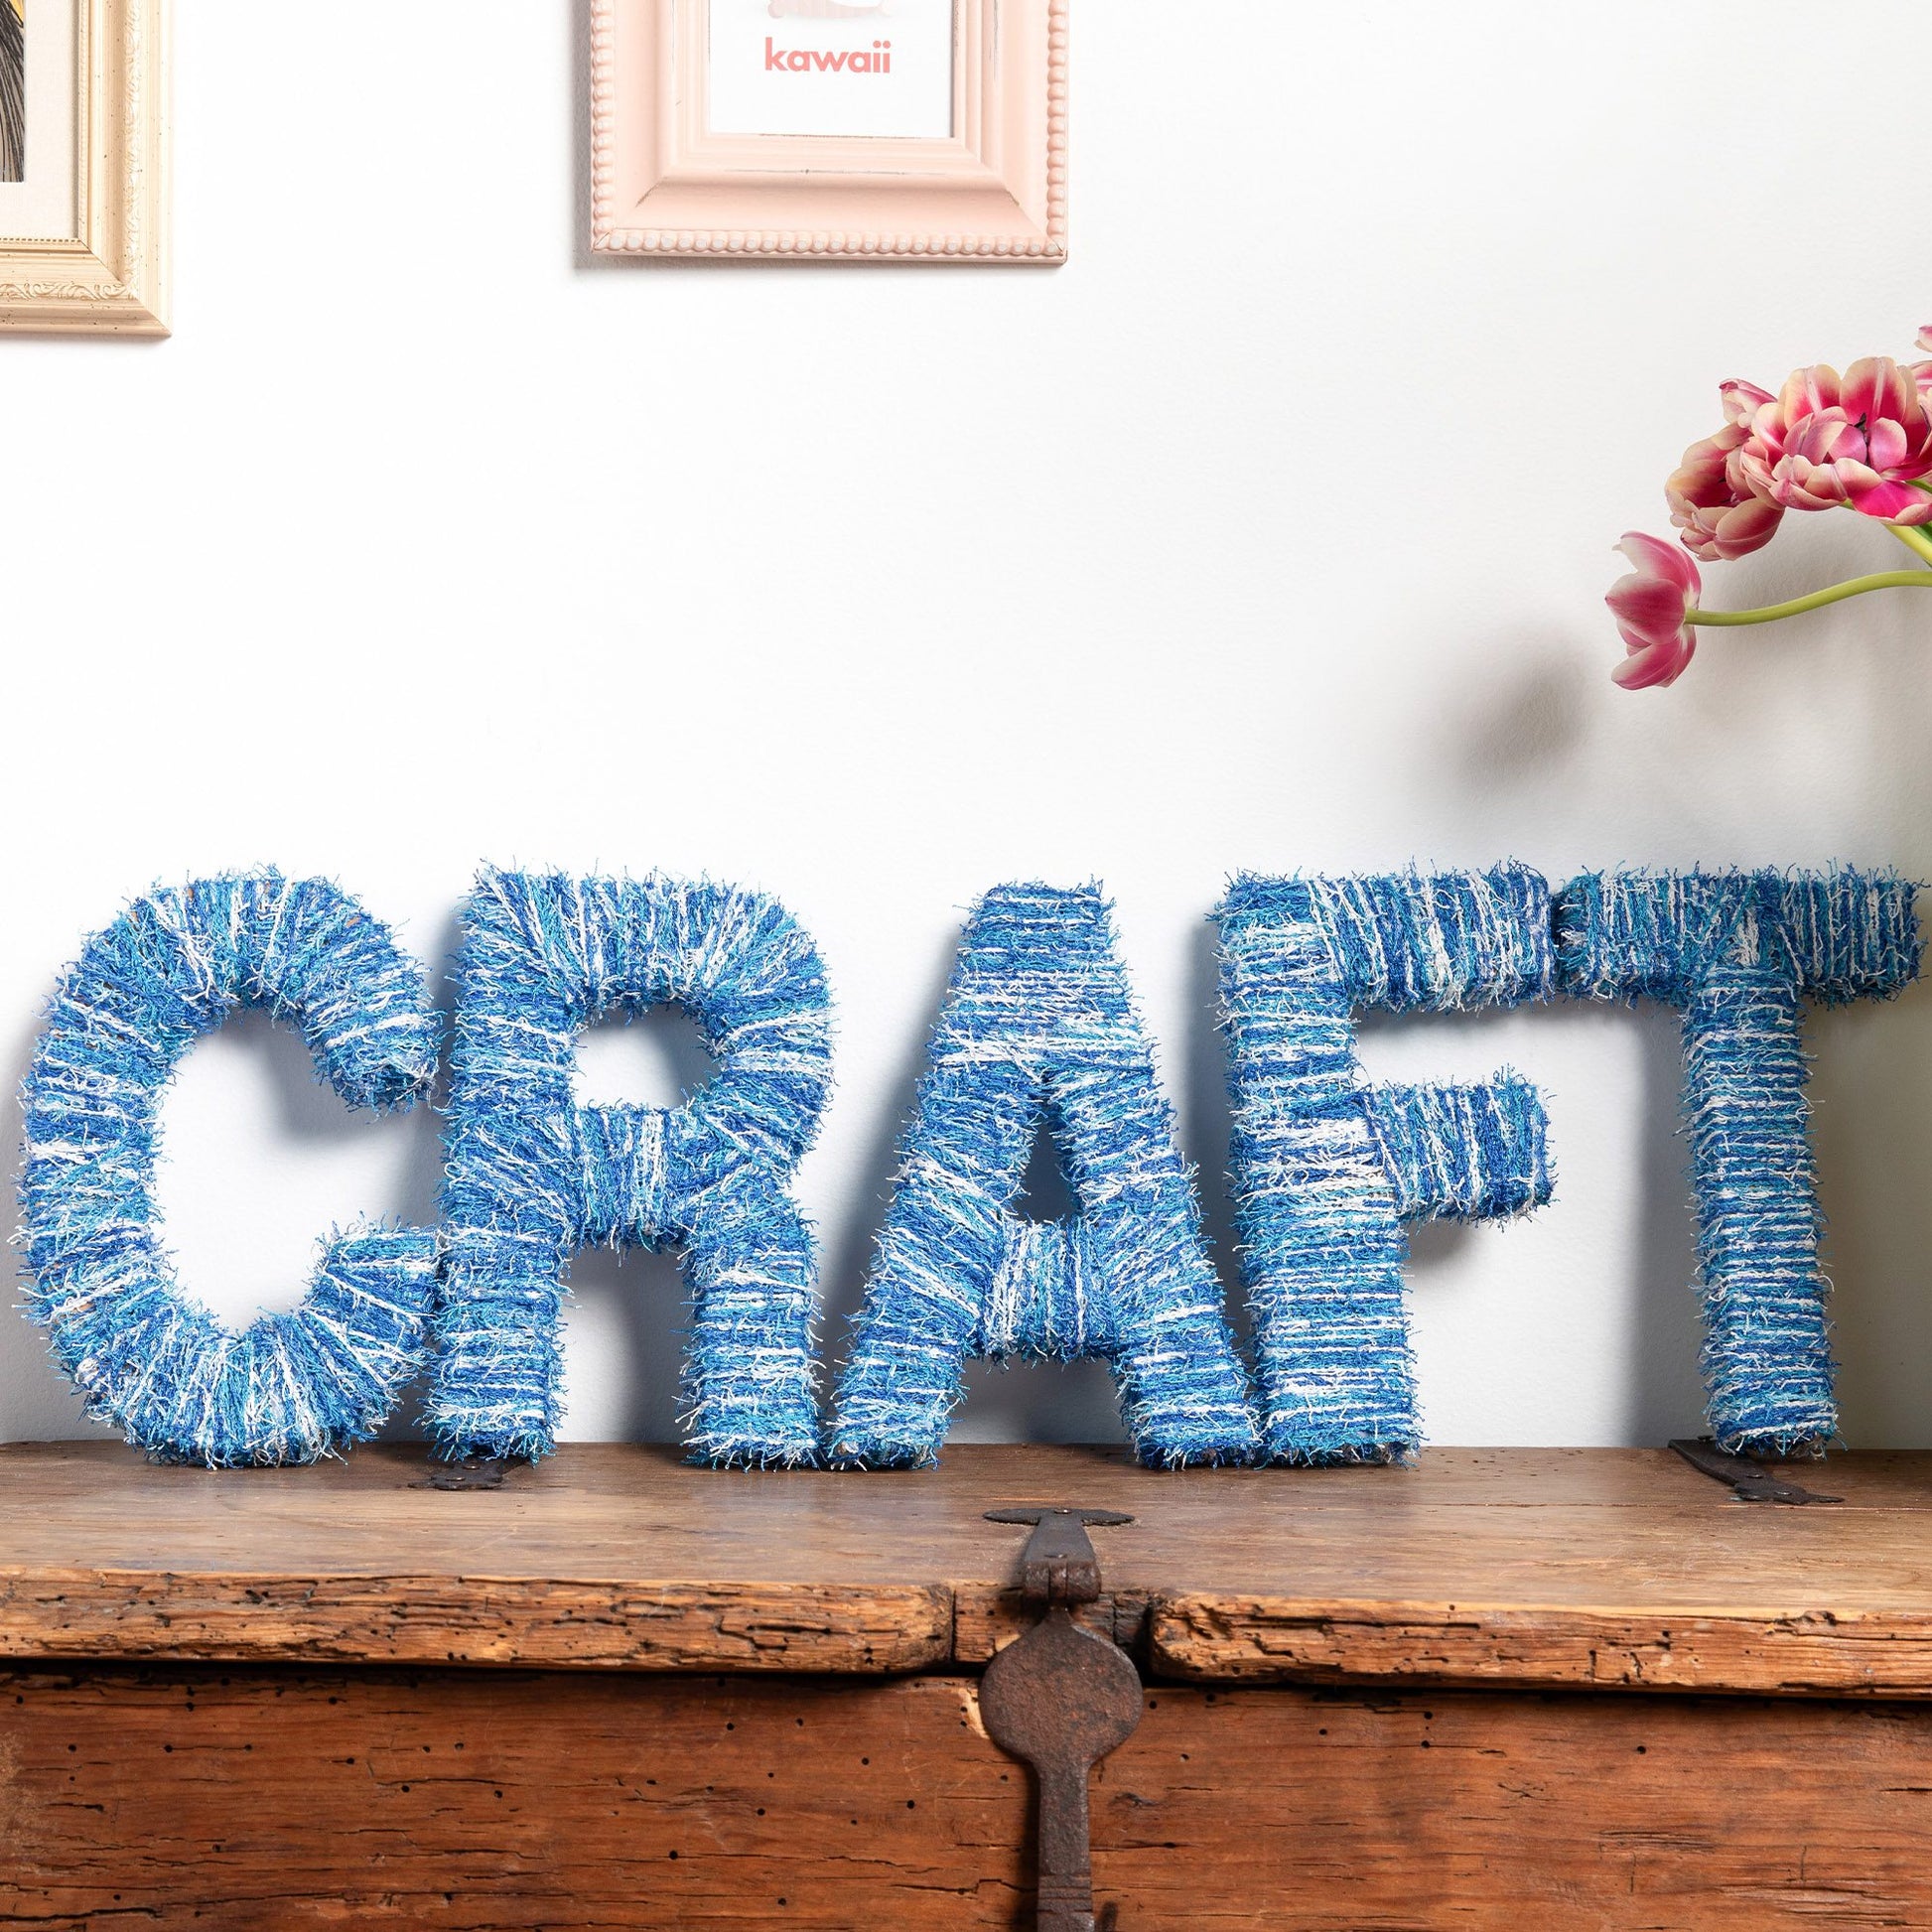 Free Red Heart Arts & Crafts Yarn Wrapped Letters Pattern